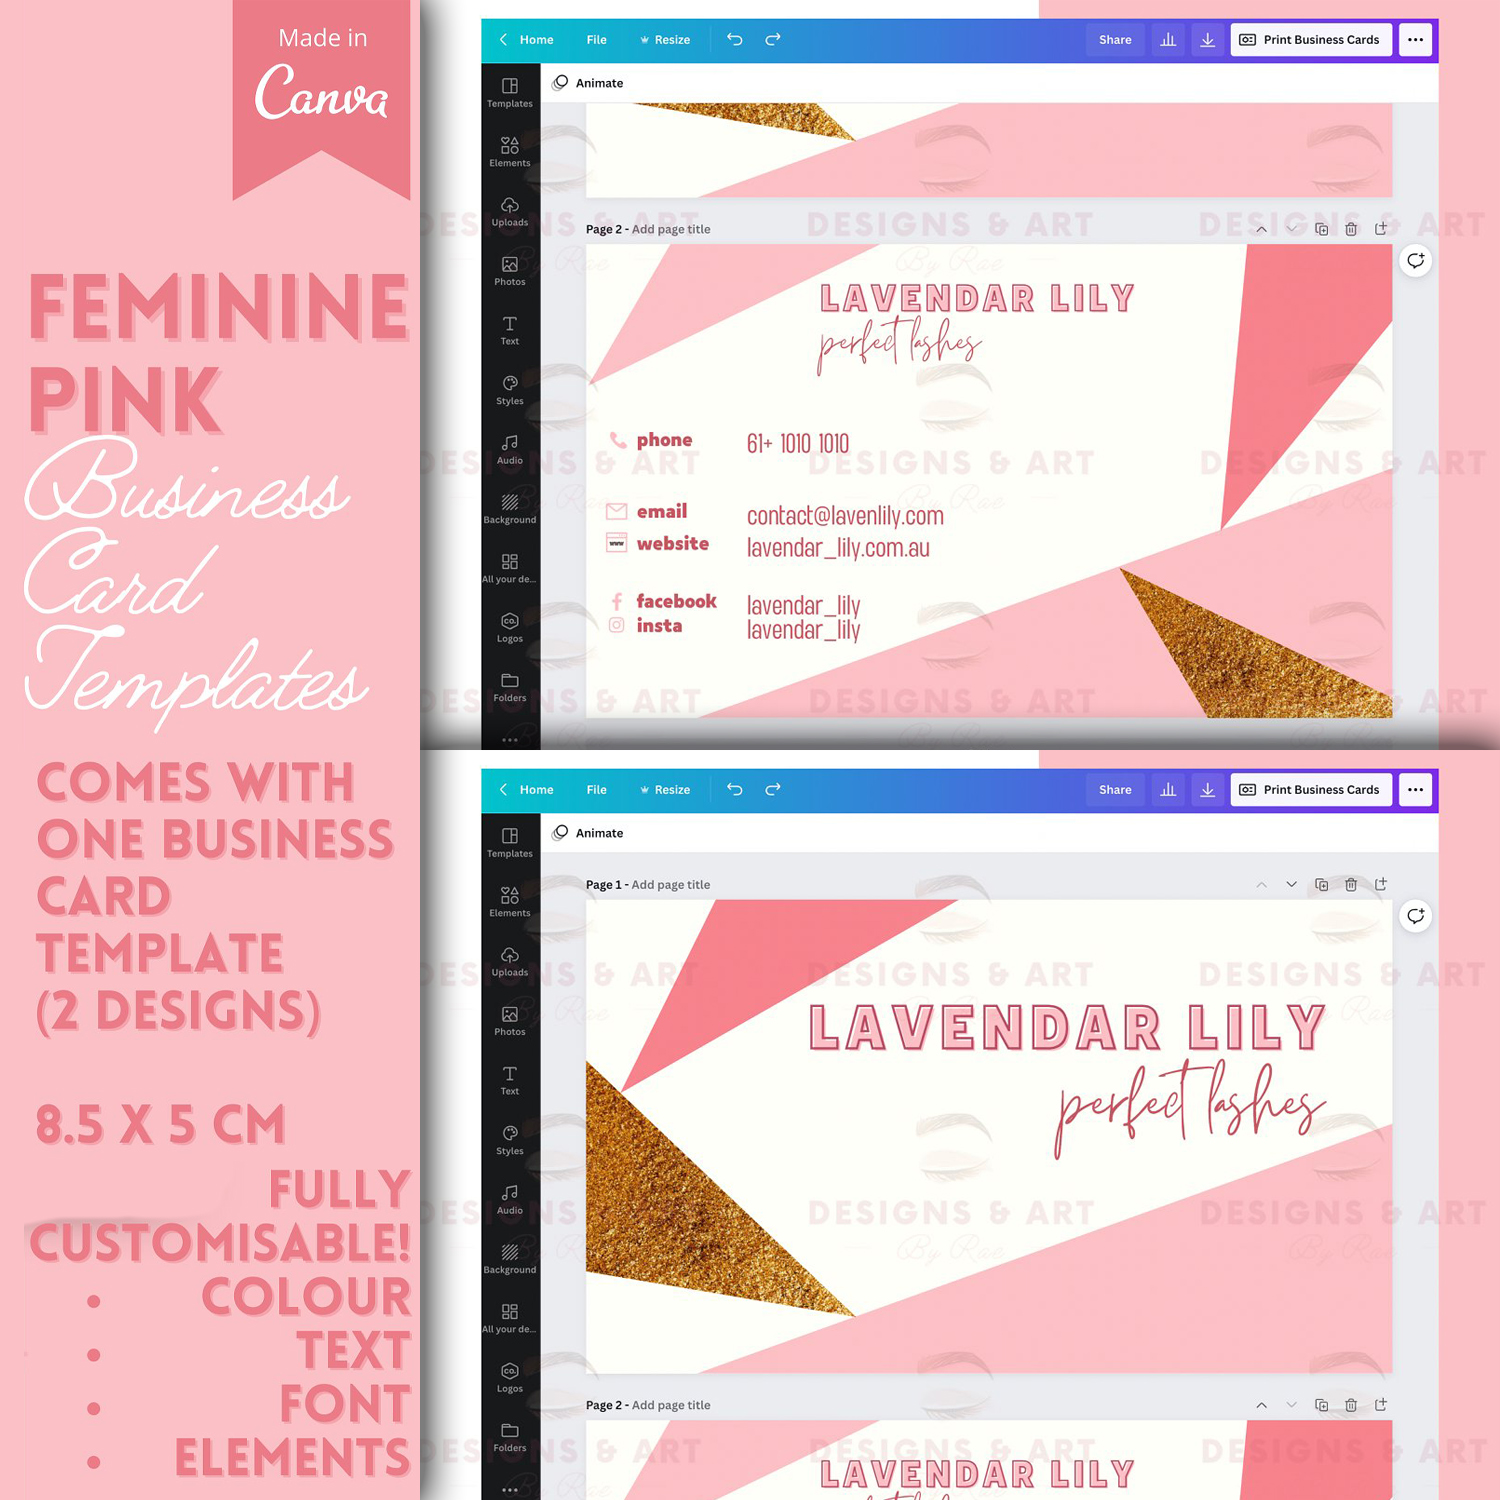 Preview pink business card templates.